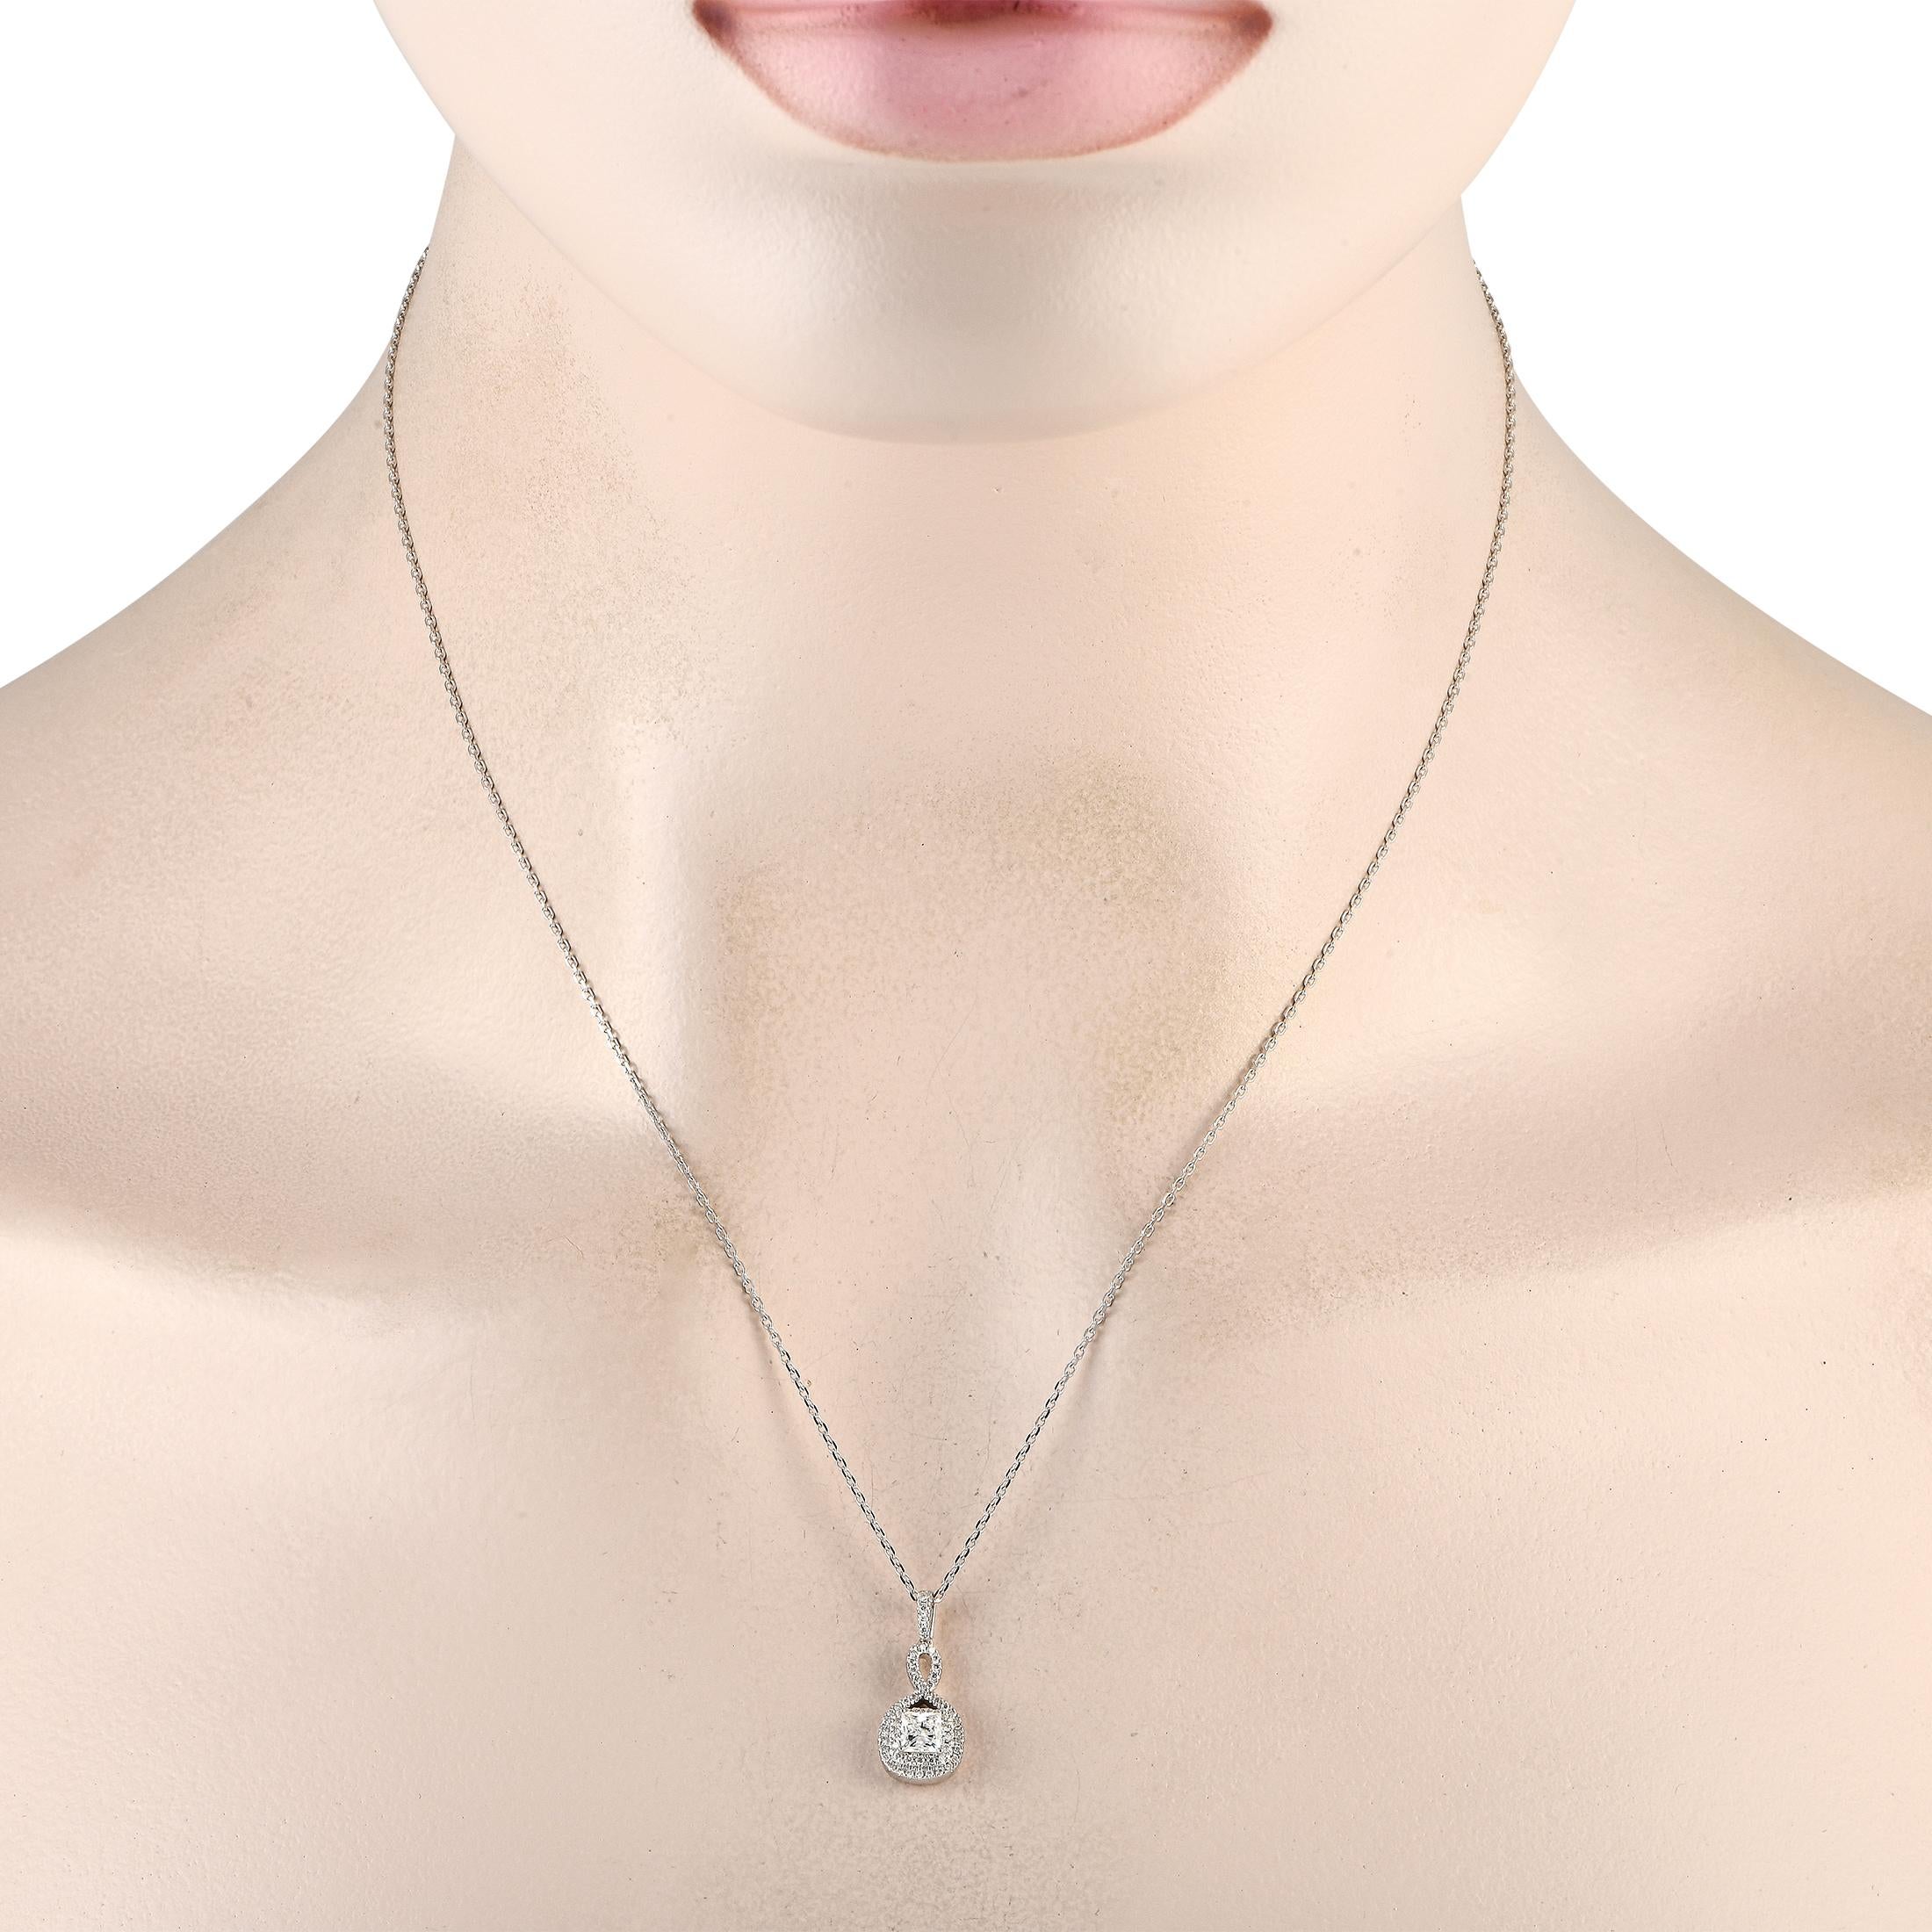 This elegant necklace makes it easy to add a touch of luxury to absolutely any ensemble. Suspended from a delicate 18 chain, this impeccably crafted accessory features a 14K White Gold pendant measuring 0.75 long by 0.45 wide. Diamonds with a total